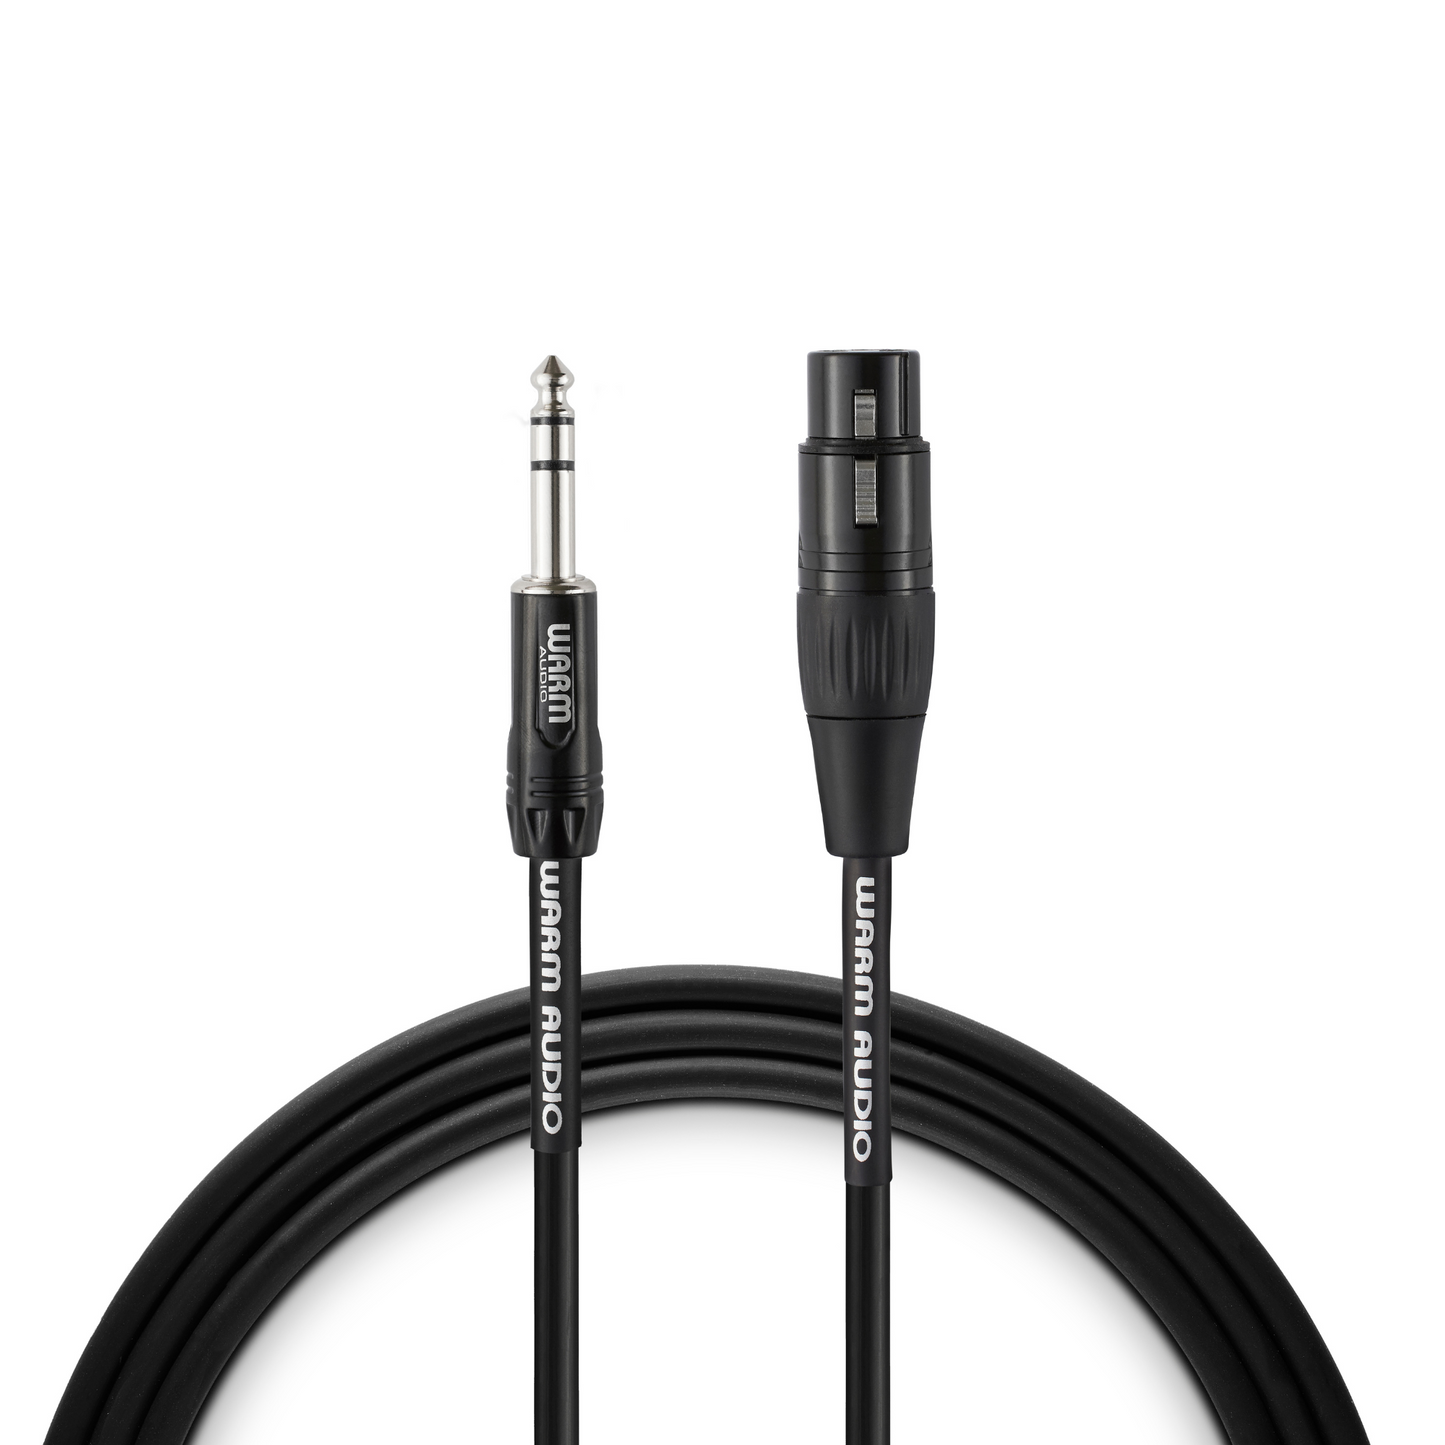 Warm Audio Pro Silver XLR Female to TRS Male Cable - 6-foot